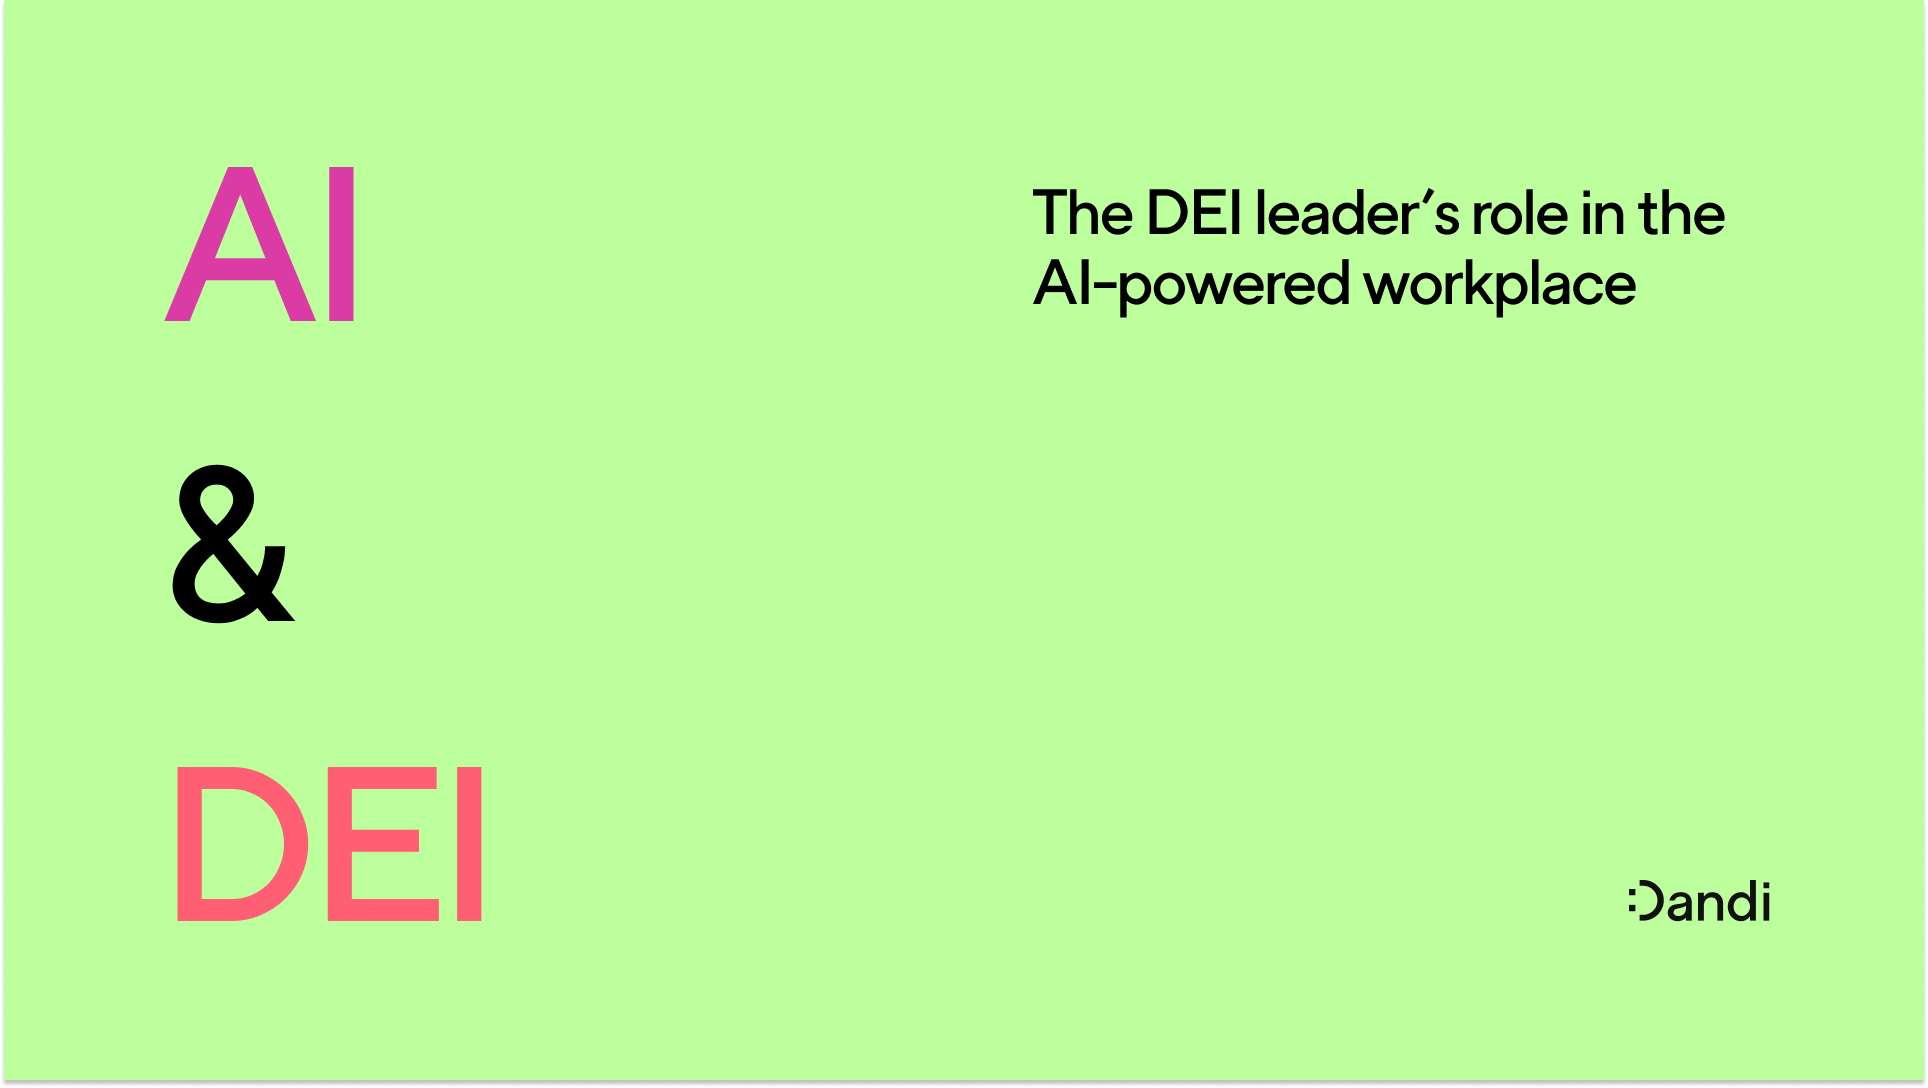 Text reads: AI & DEI: The DEI leader's role in the AI-powered workplace. The Dandi smiley logo is in the lower right corner.